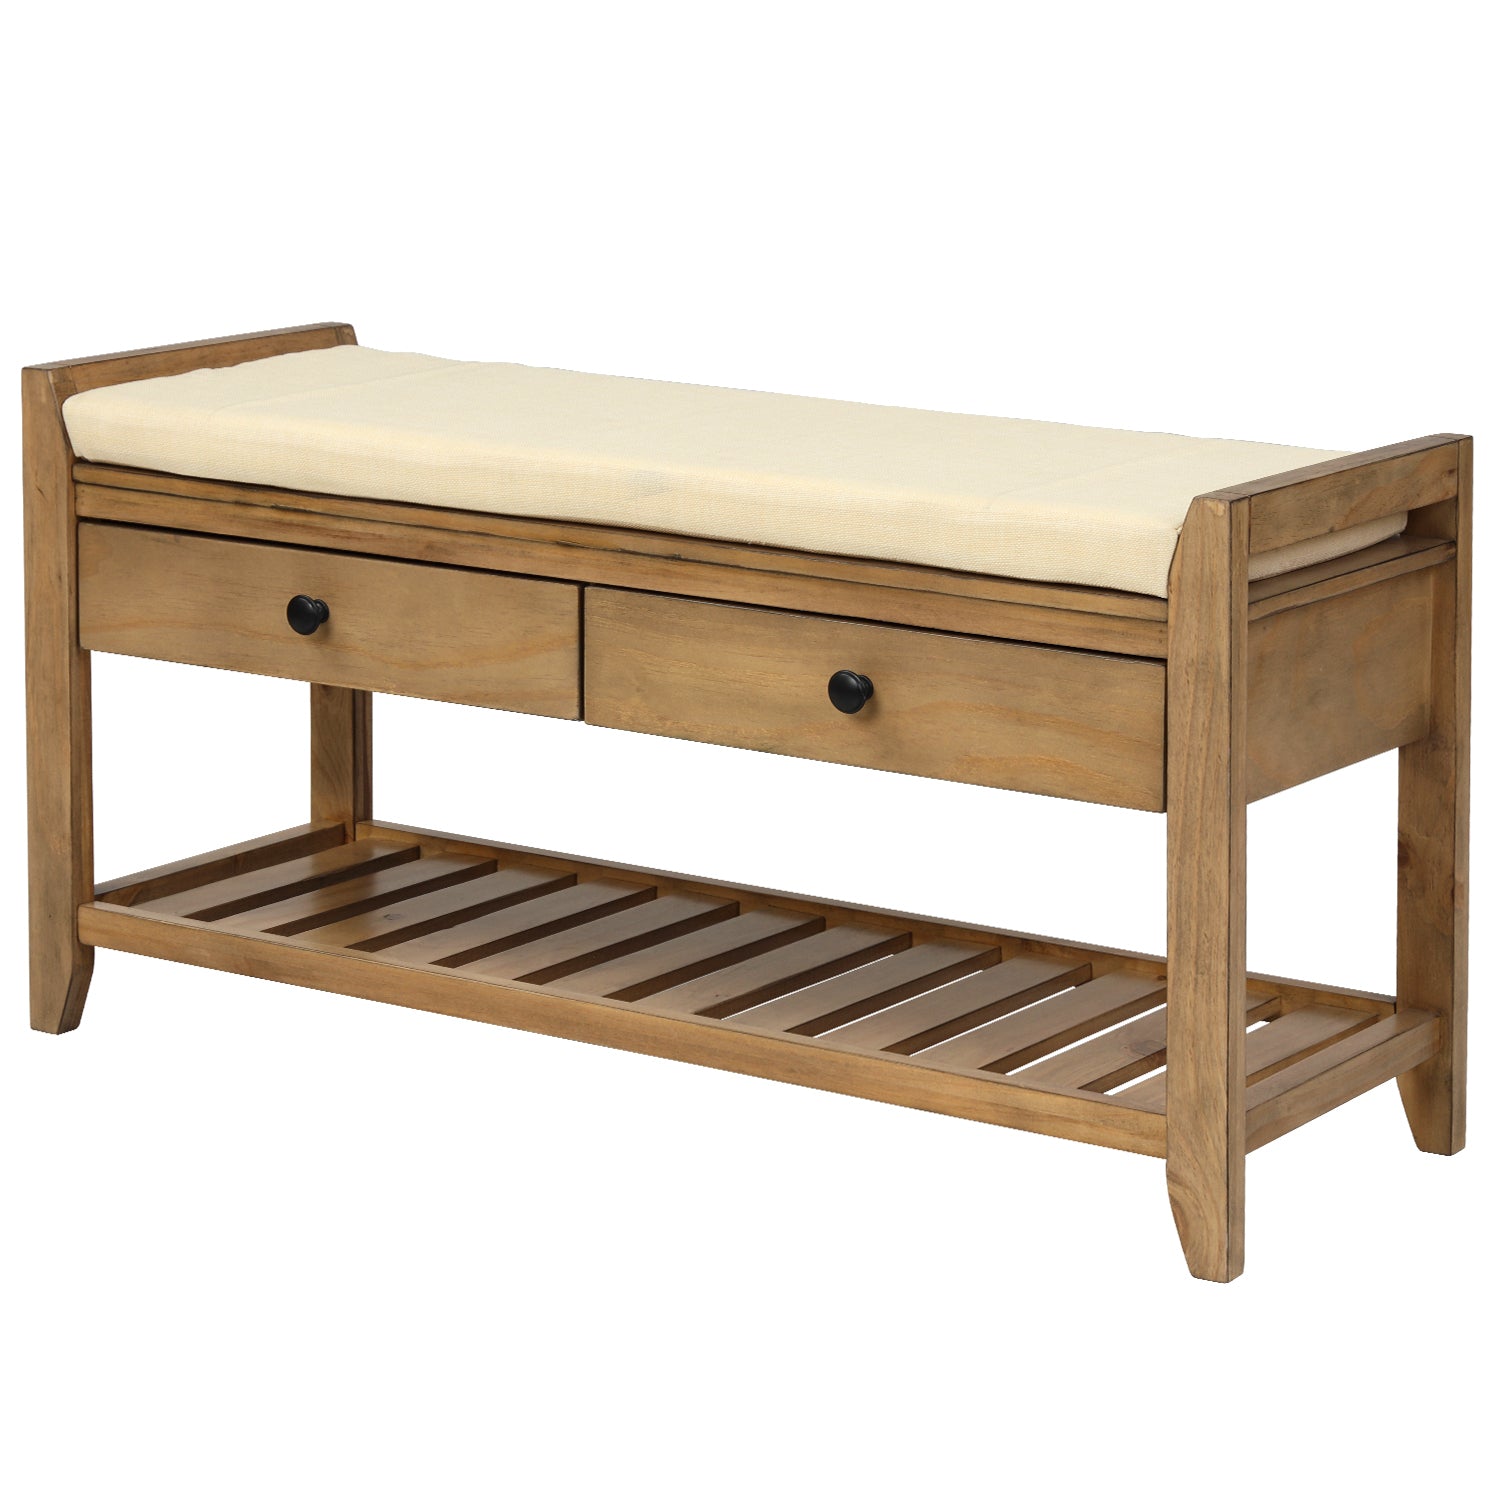 39" Entryway Storage Seating Bench with cushion